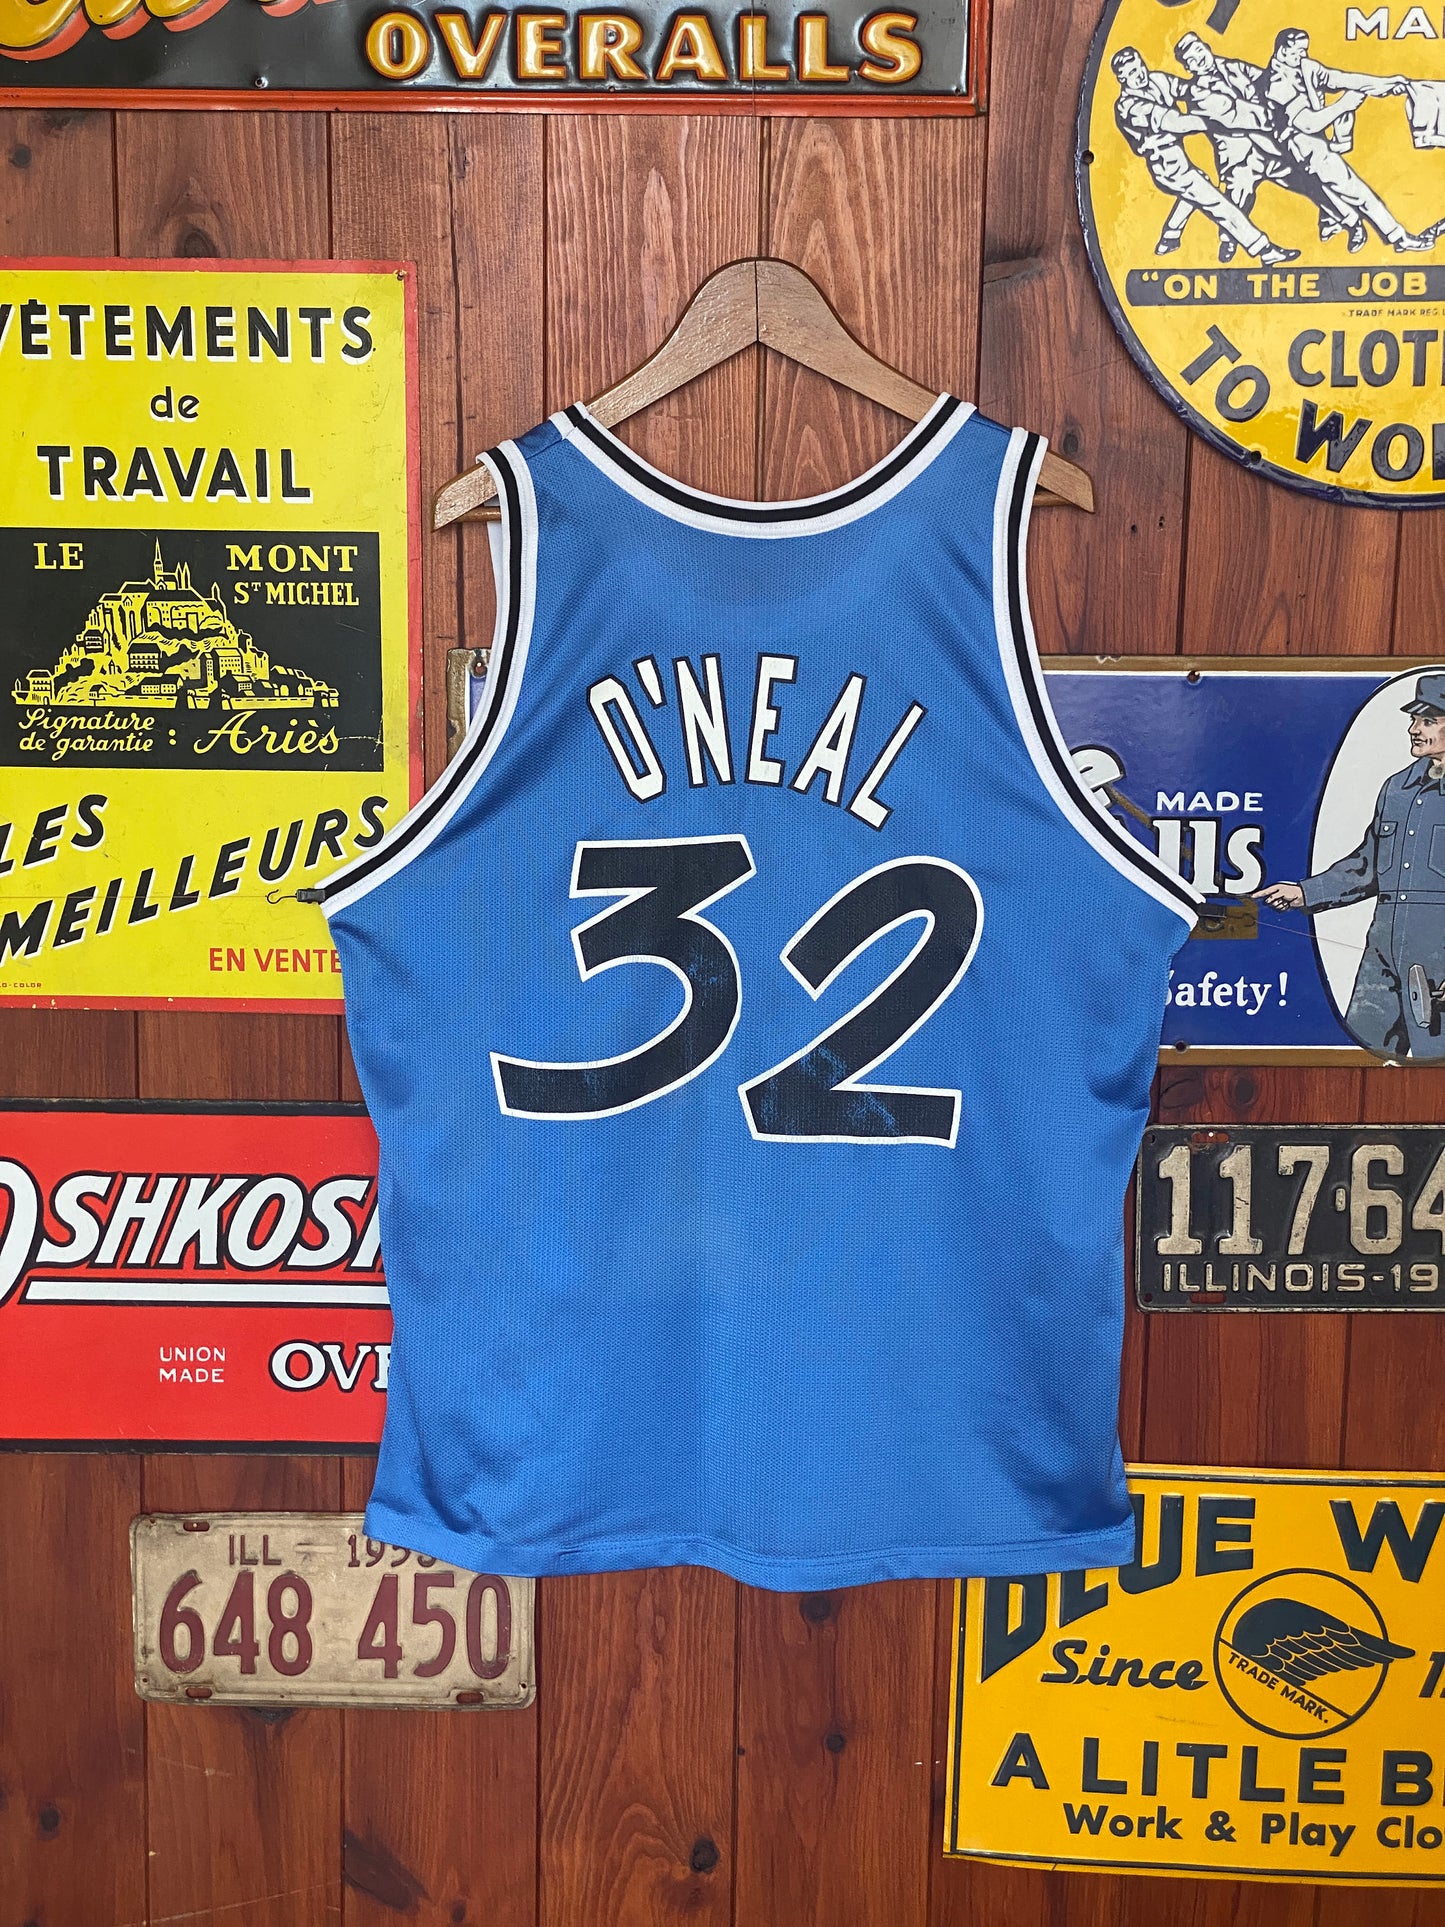  Vintage 90s Orlando NBA jersey with player O'Neal #32, size 48 - front view. Made by Champion.